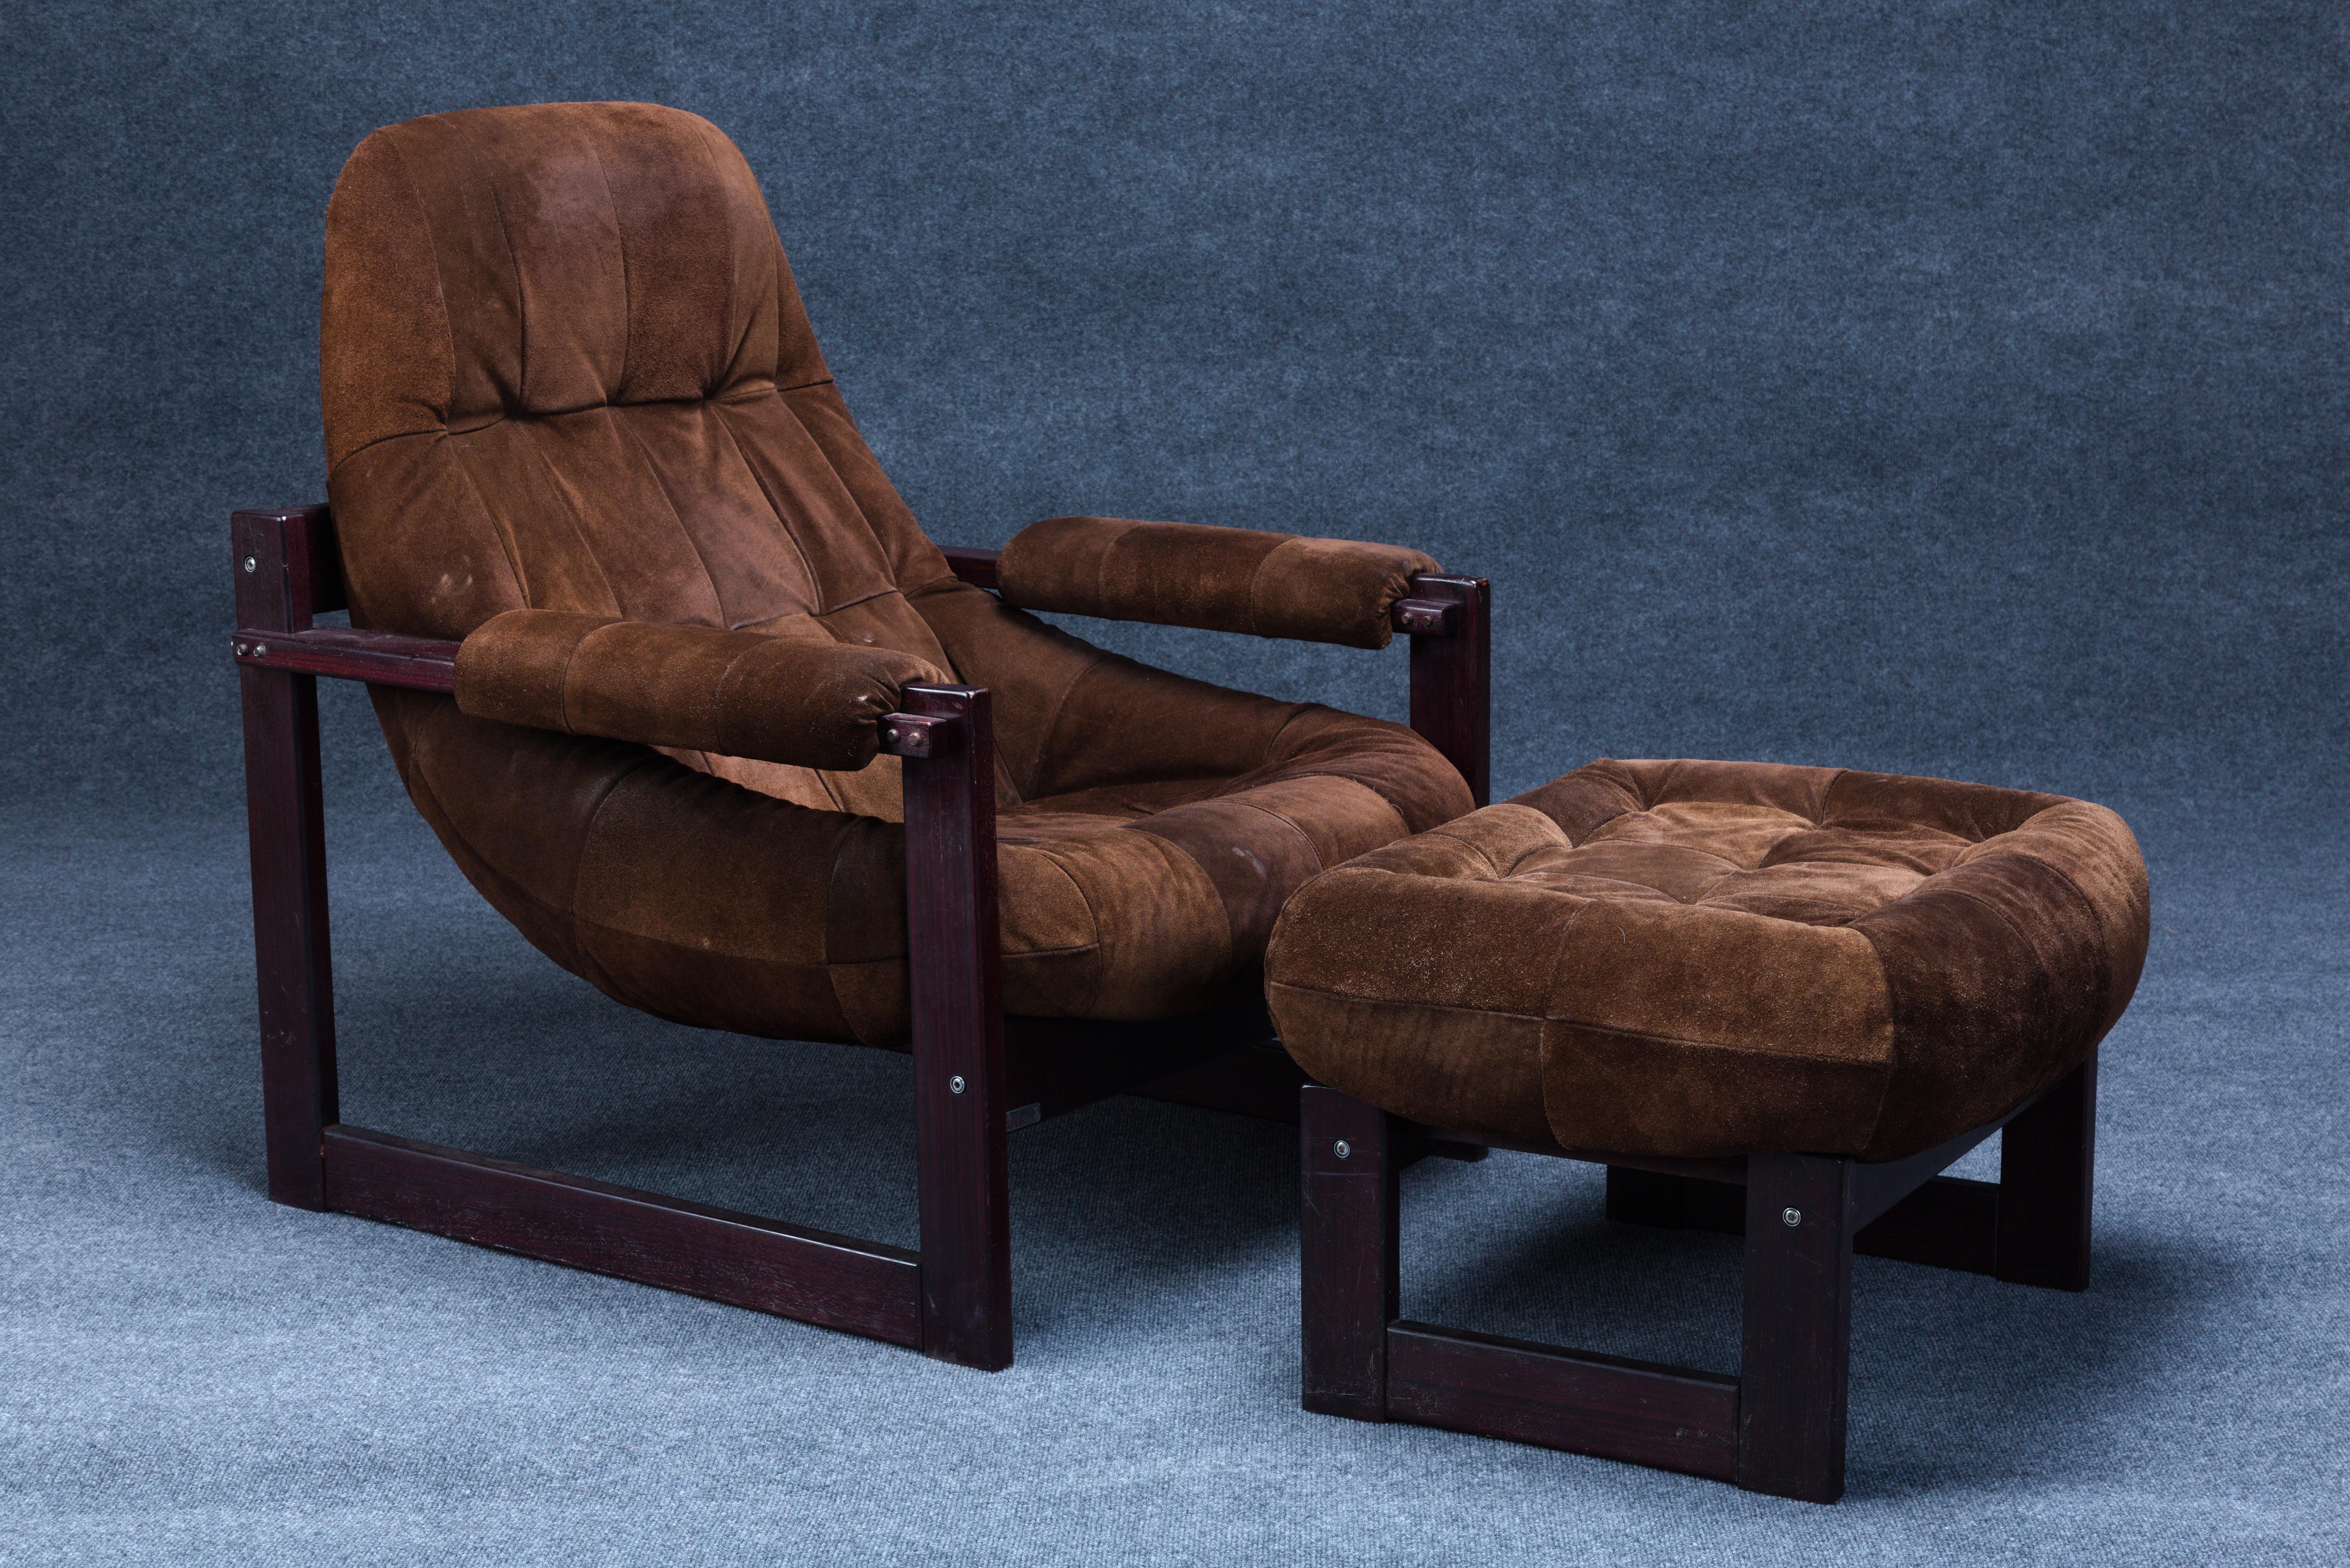 Brazilian Mid-Century Modern Armchair/Ottoman by Percival Lafer in Suede Leather For Sale 5